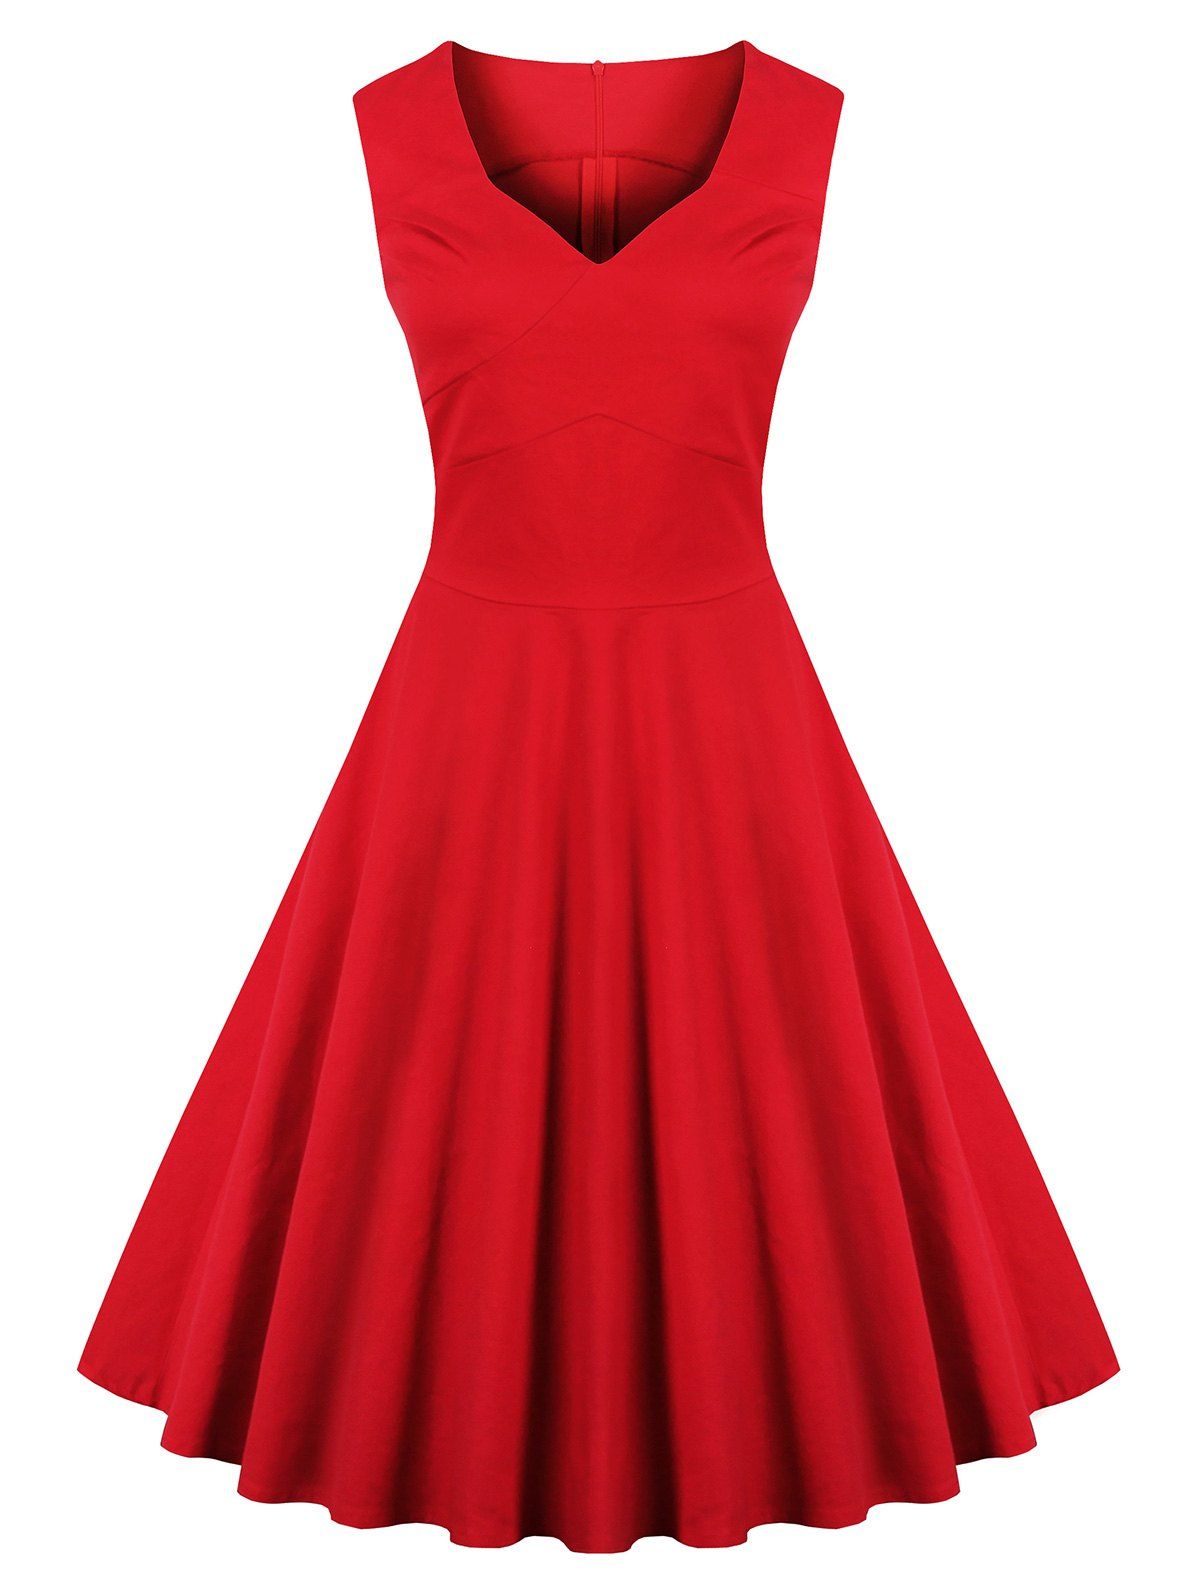 2018 Vintage Going Out Flare Cocktail Dress In Red L | Rosegal.com